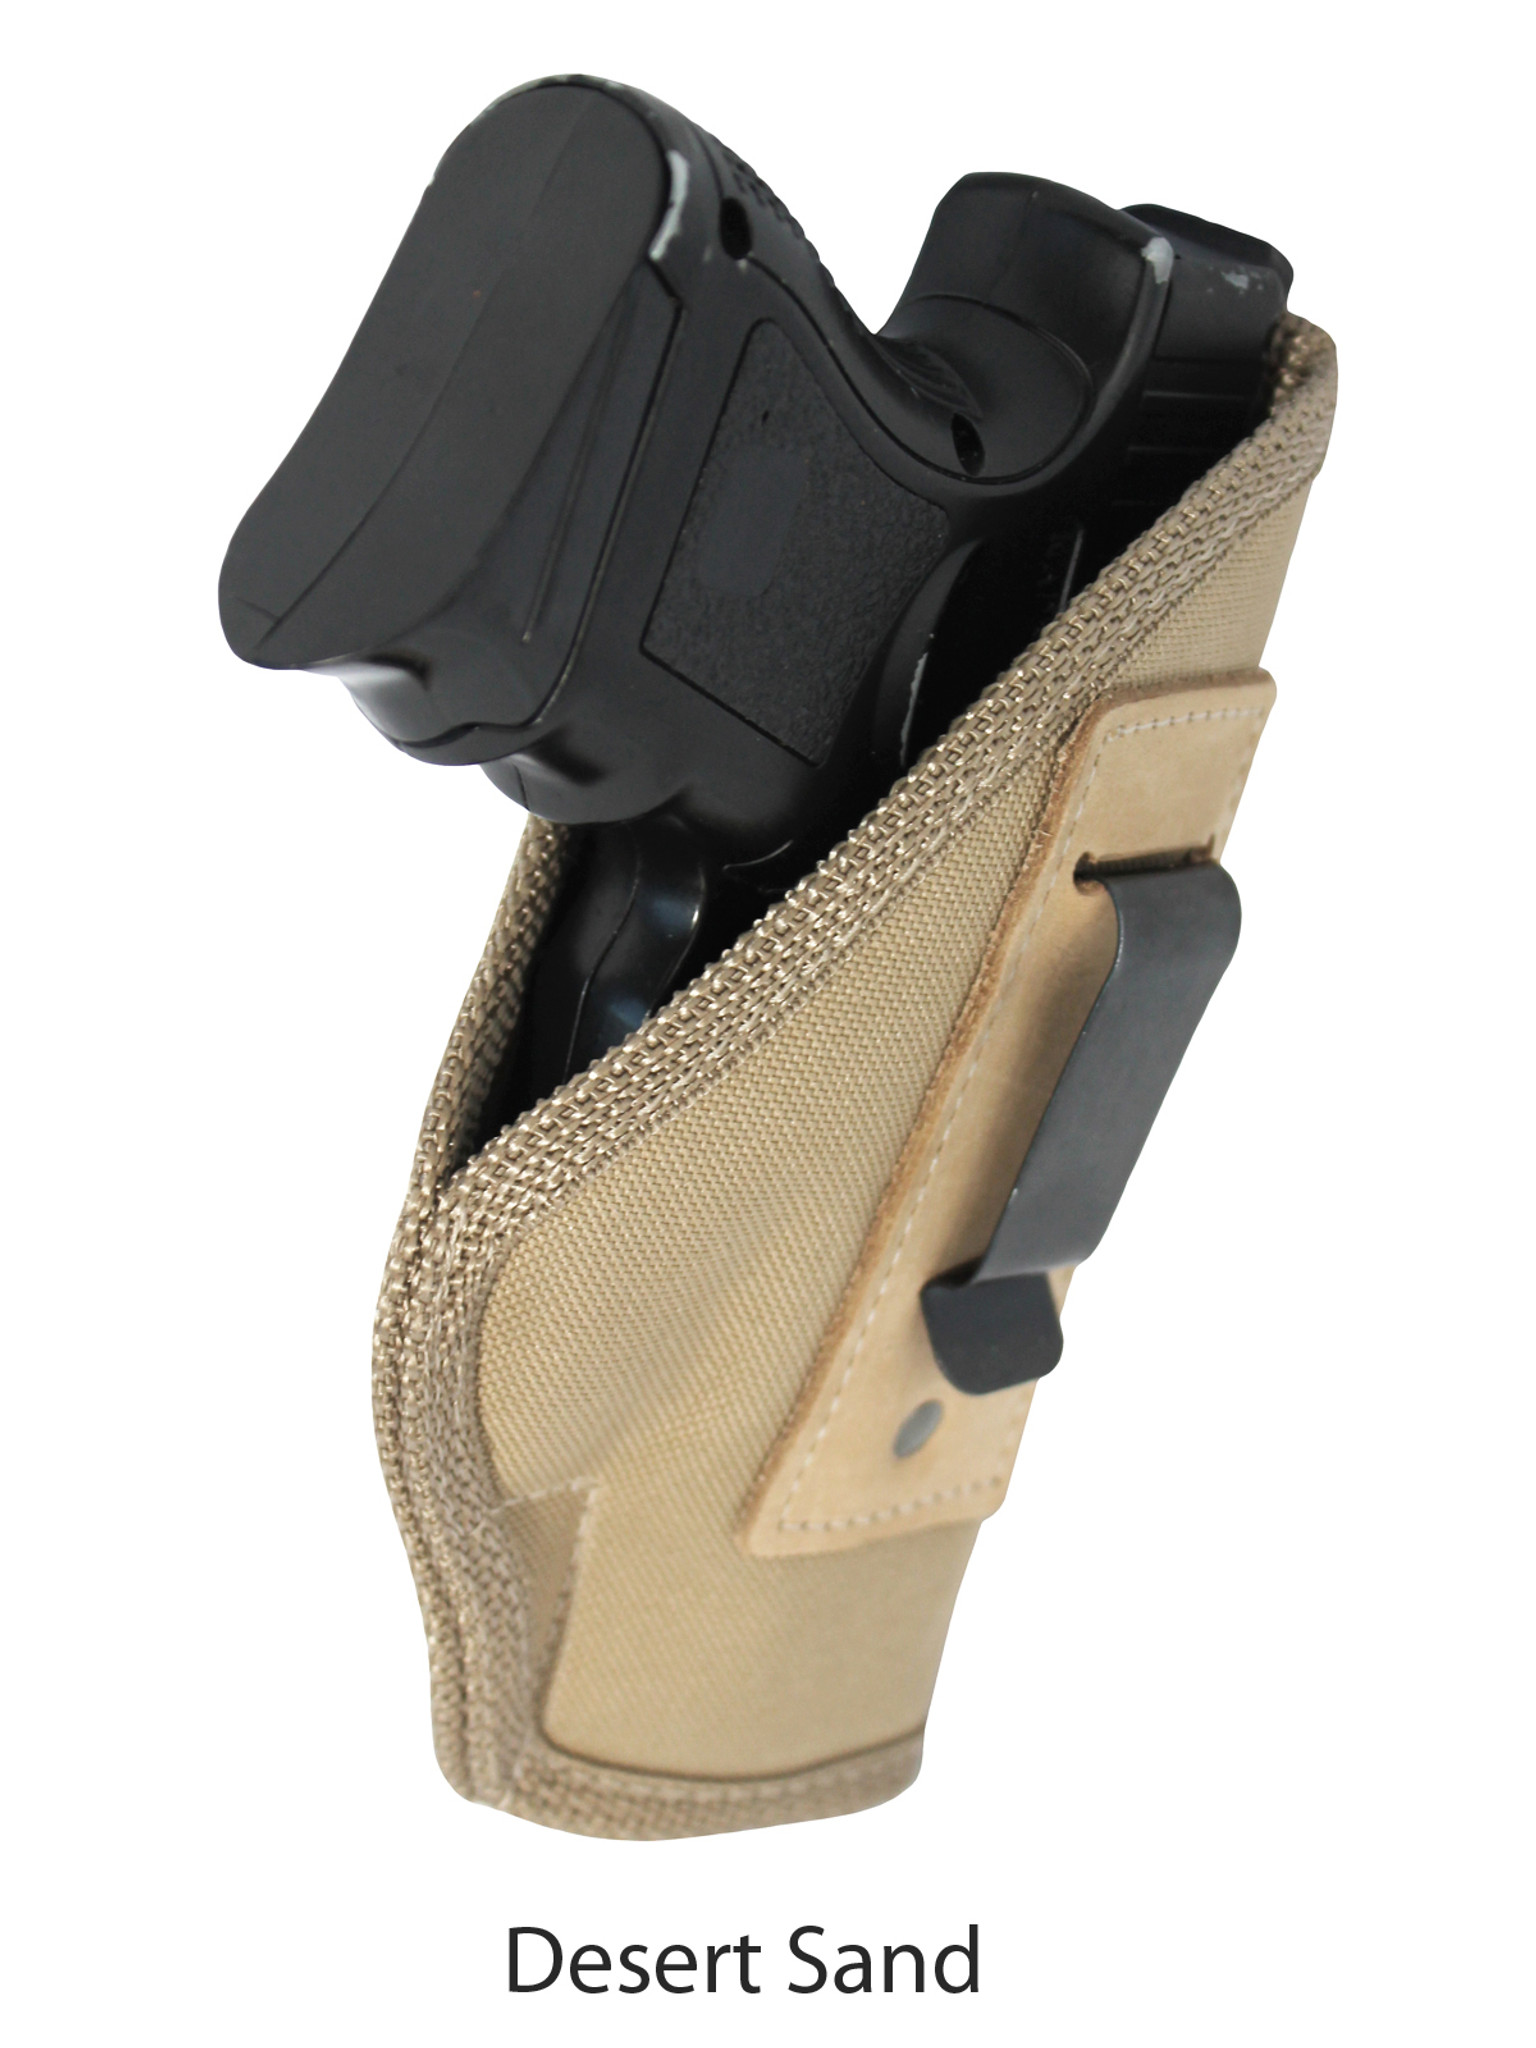 Concealed Belt Holster Ambidextrous IWB Holster Compact Subcompact Pistols Top